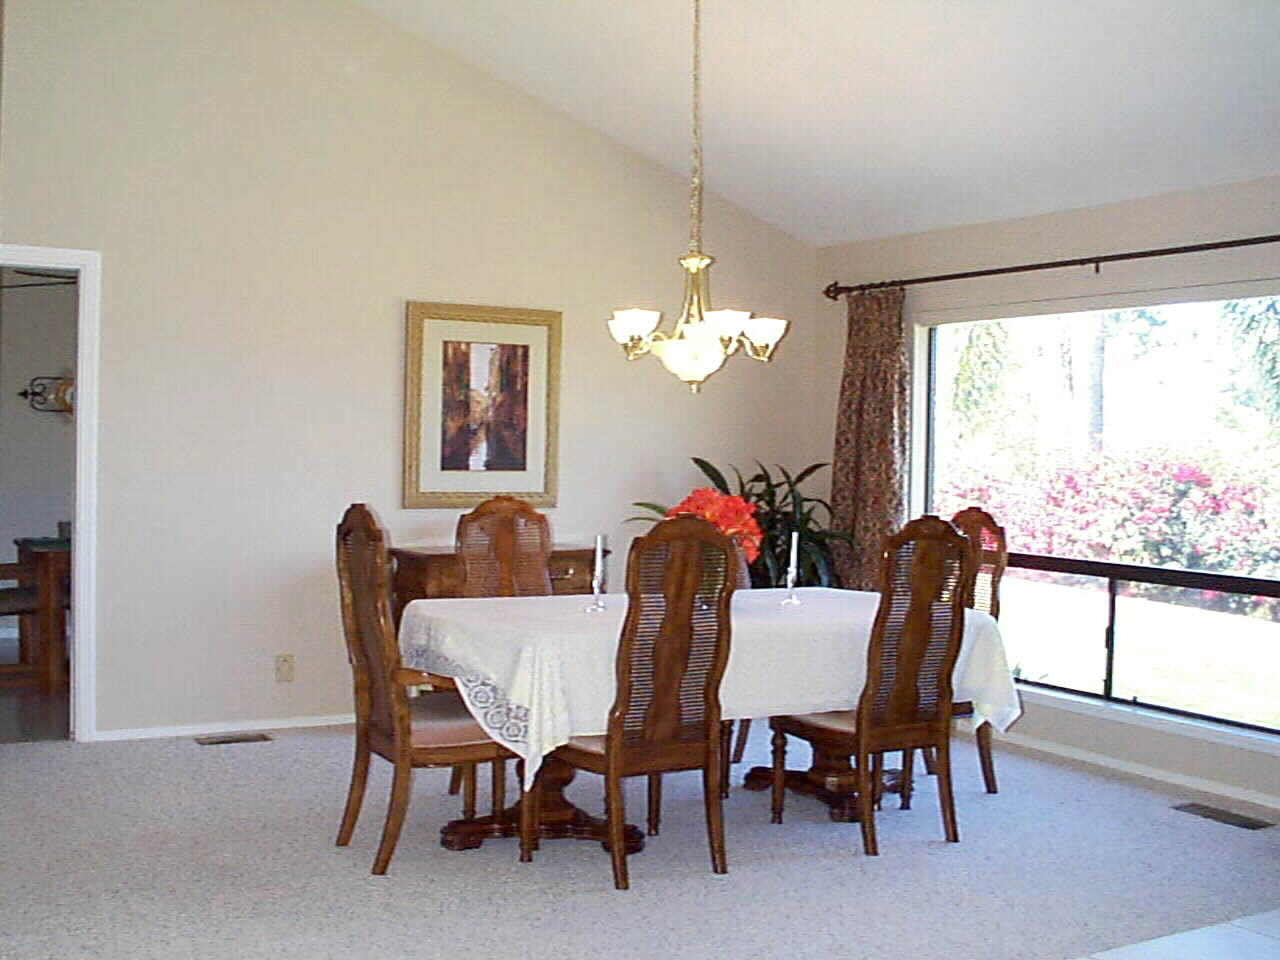 Ready for the Largest of Families... this spacious formal dining space enjoys the private... Panoramic View of Dreams